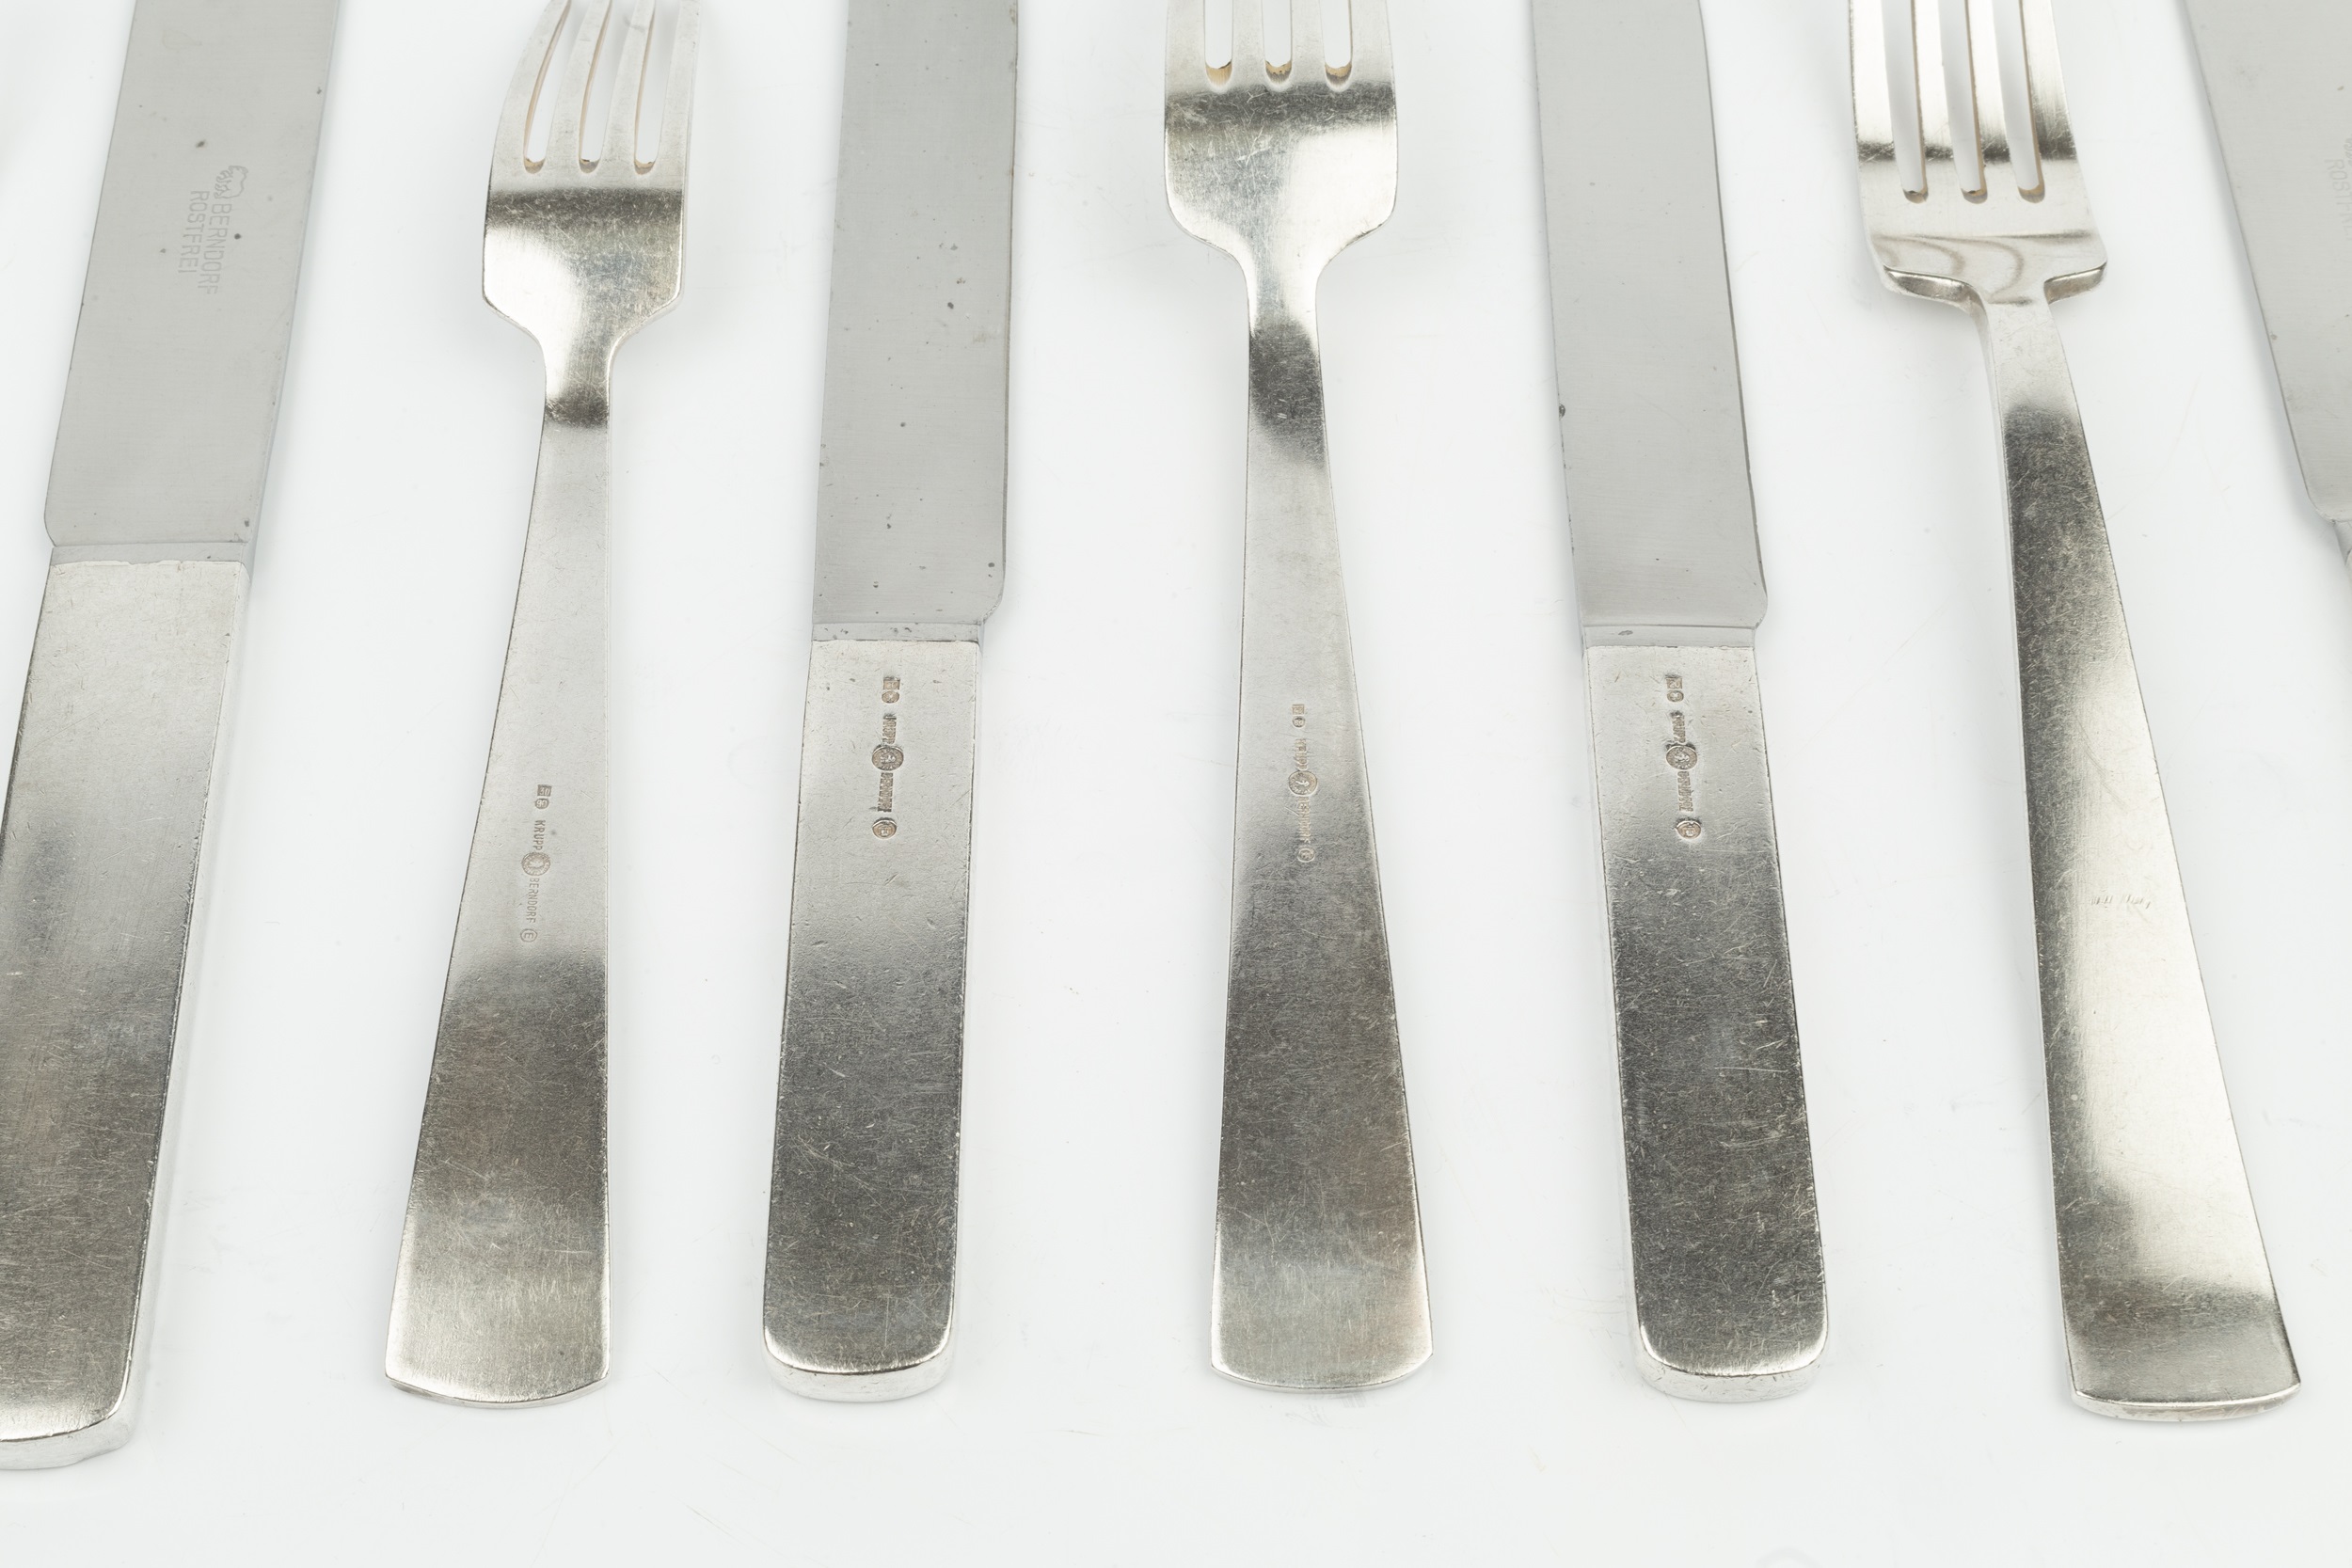 Gio Ponti (1891-1979) for Krupp, Berndorf 66-piece cutlery set, 1938 model no.4900, silver plate - Image 2 of 2